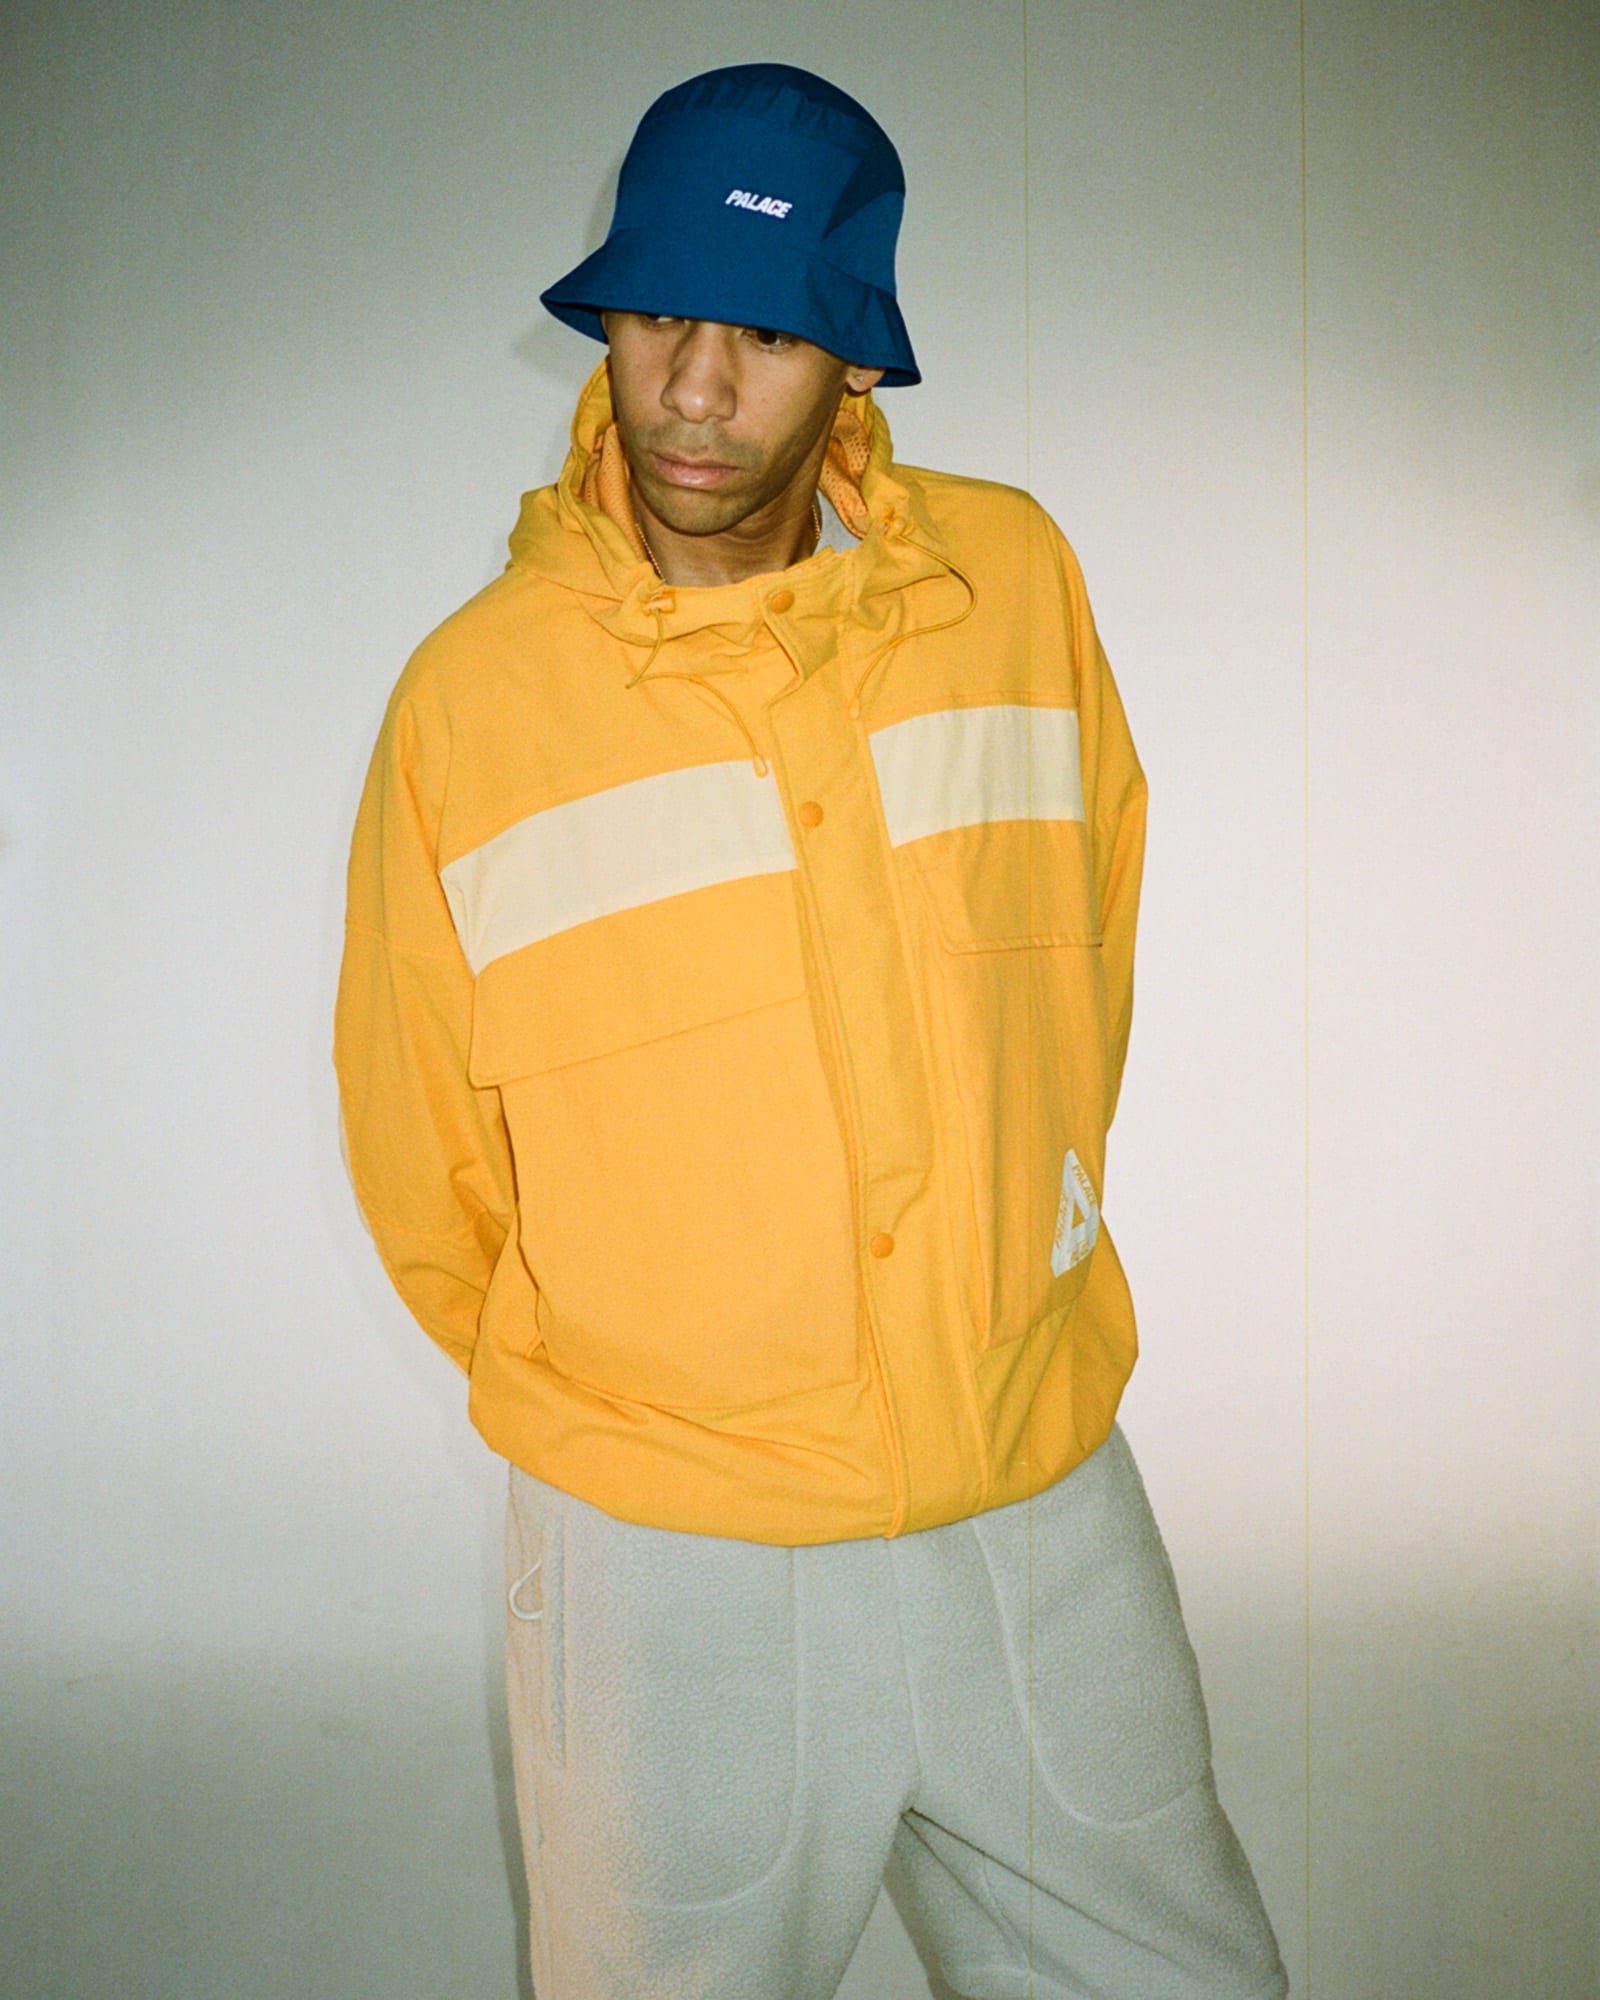 Lookbook image from Palace campaign